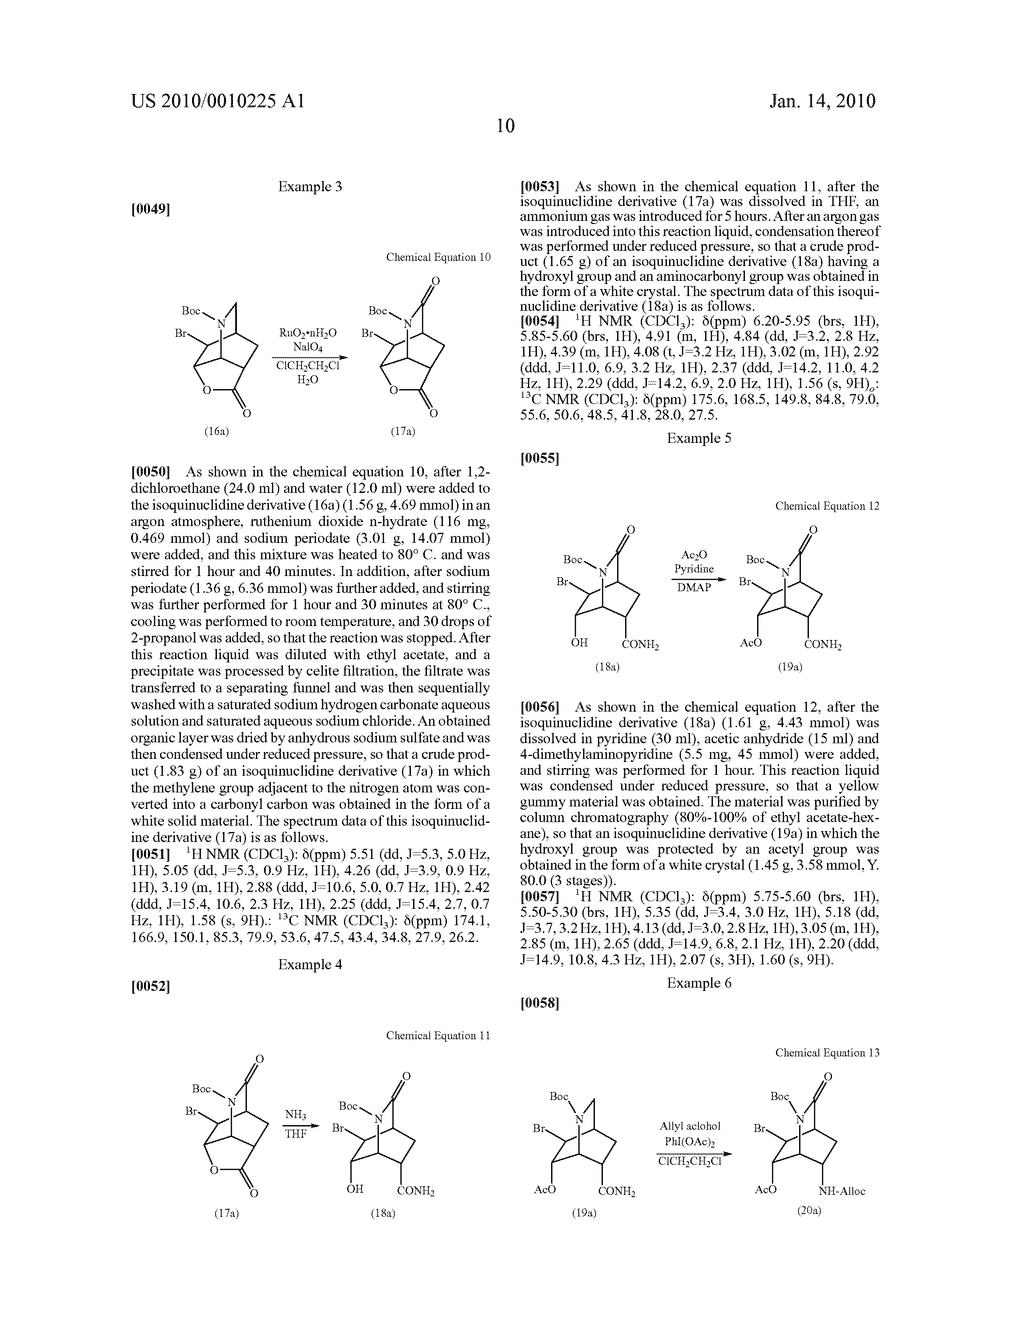 ISOQUINUCLIDINE DERIVATIVE AND METHOD FOR MANUFACTURING 1-CYCLOHEXENE-1-CARBOXYLIC ACID DERIVATIVE USING THE SAME - diagram, schematic, and image 11